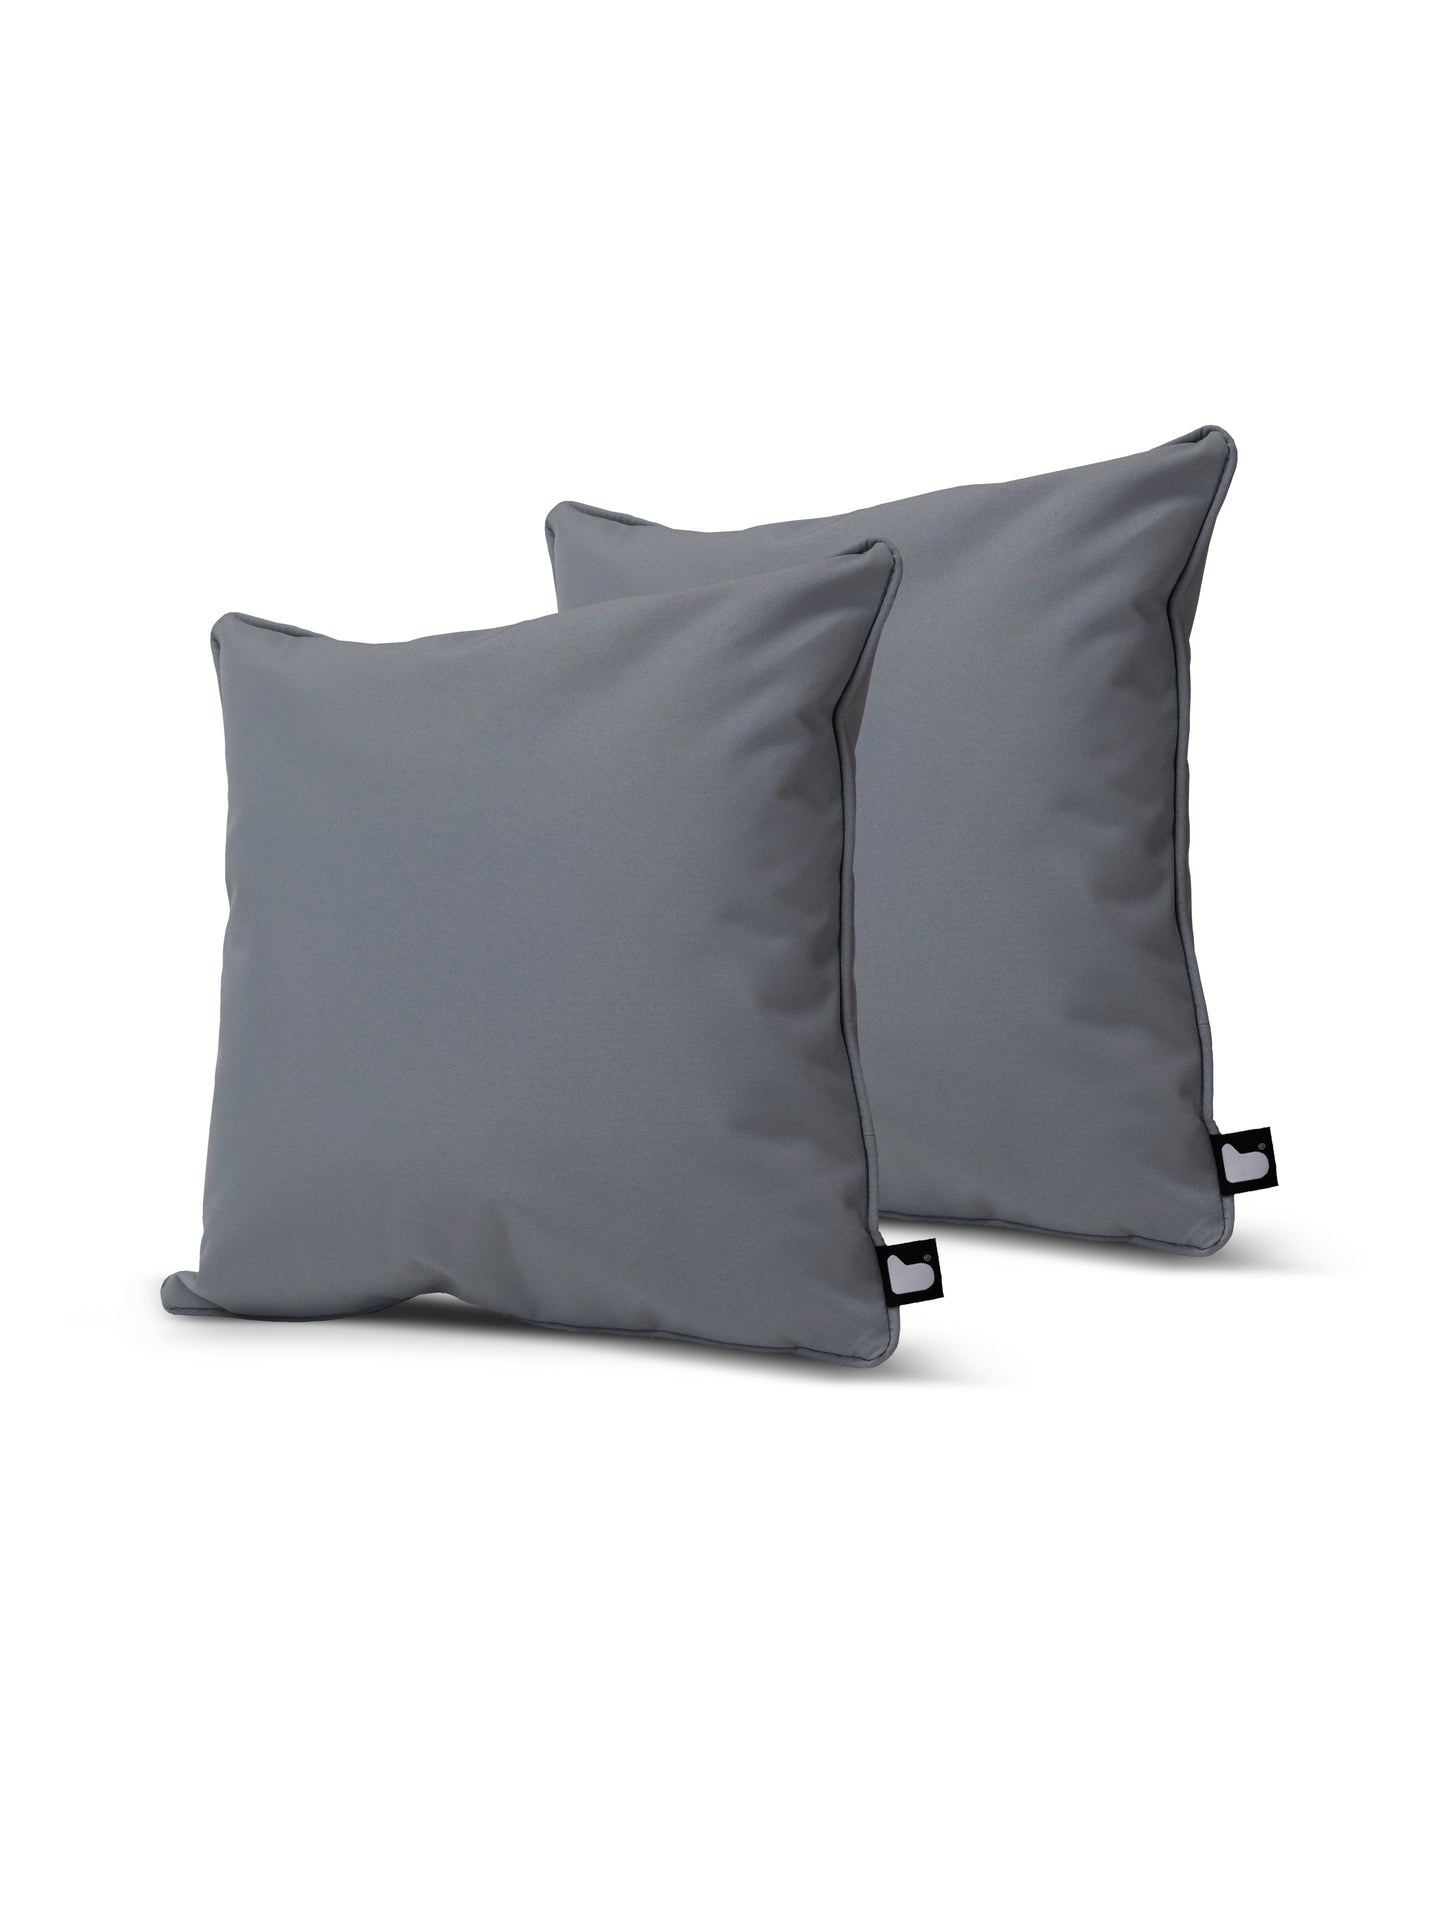 Two square, gray cushions crafted from breathable polyester are positioned side by side, slightly overlapping. Each splash-proof cushion has a small black loop tag on one corner. The background is plain white, placing full focus on the Brisks B Cushion Twin Pack Brights Collection UV-resistant cushions.